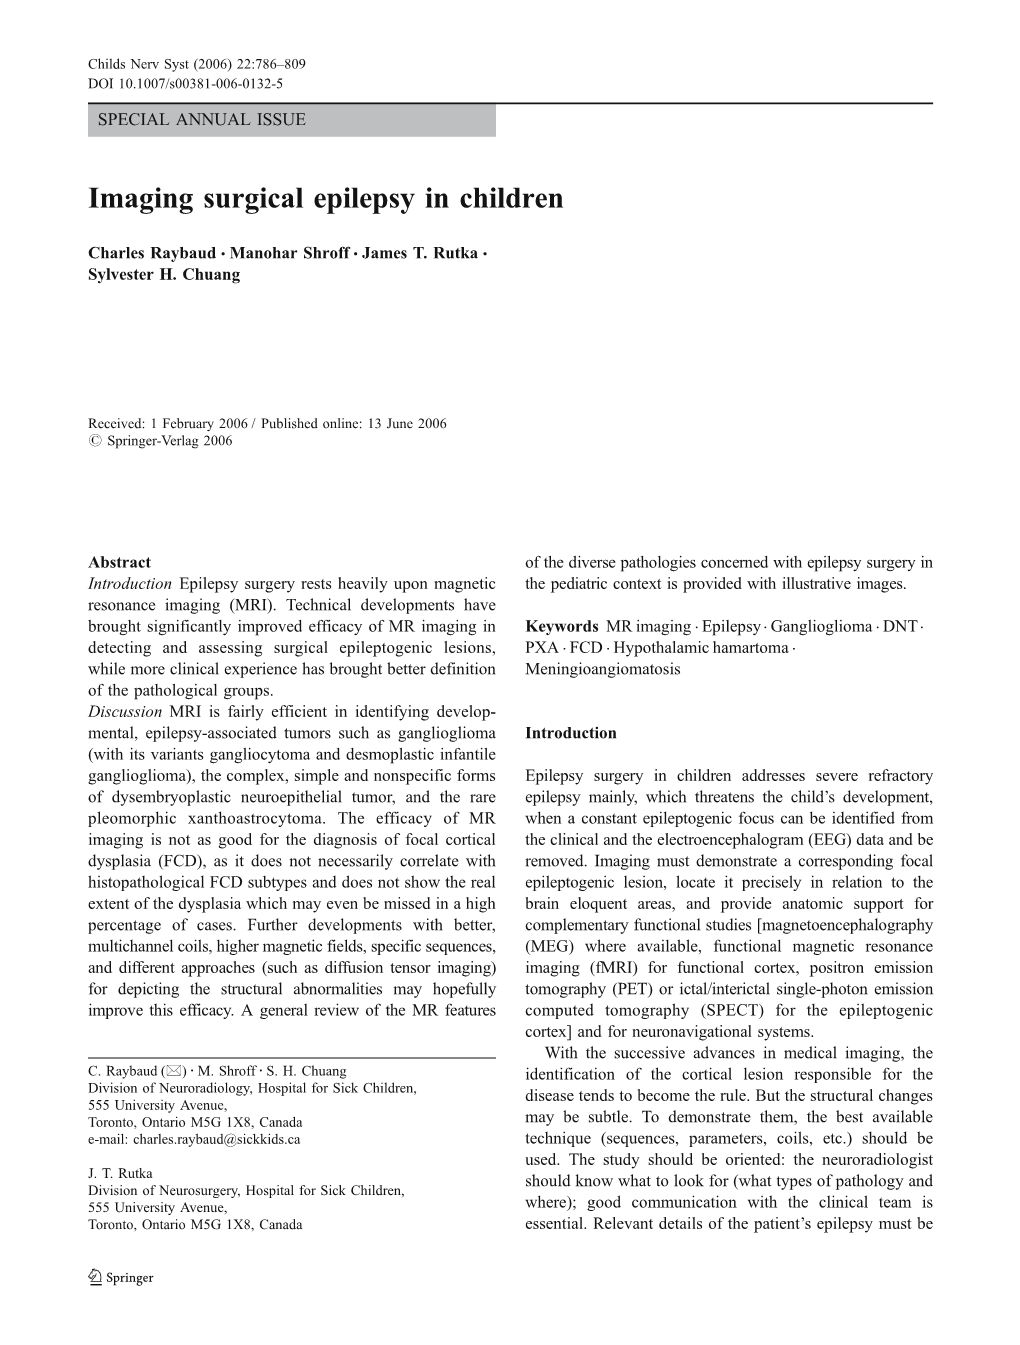 Imaging Surgical Epilepsy in Children